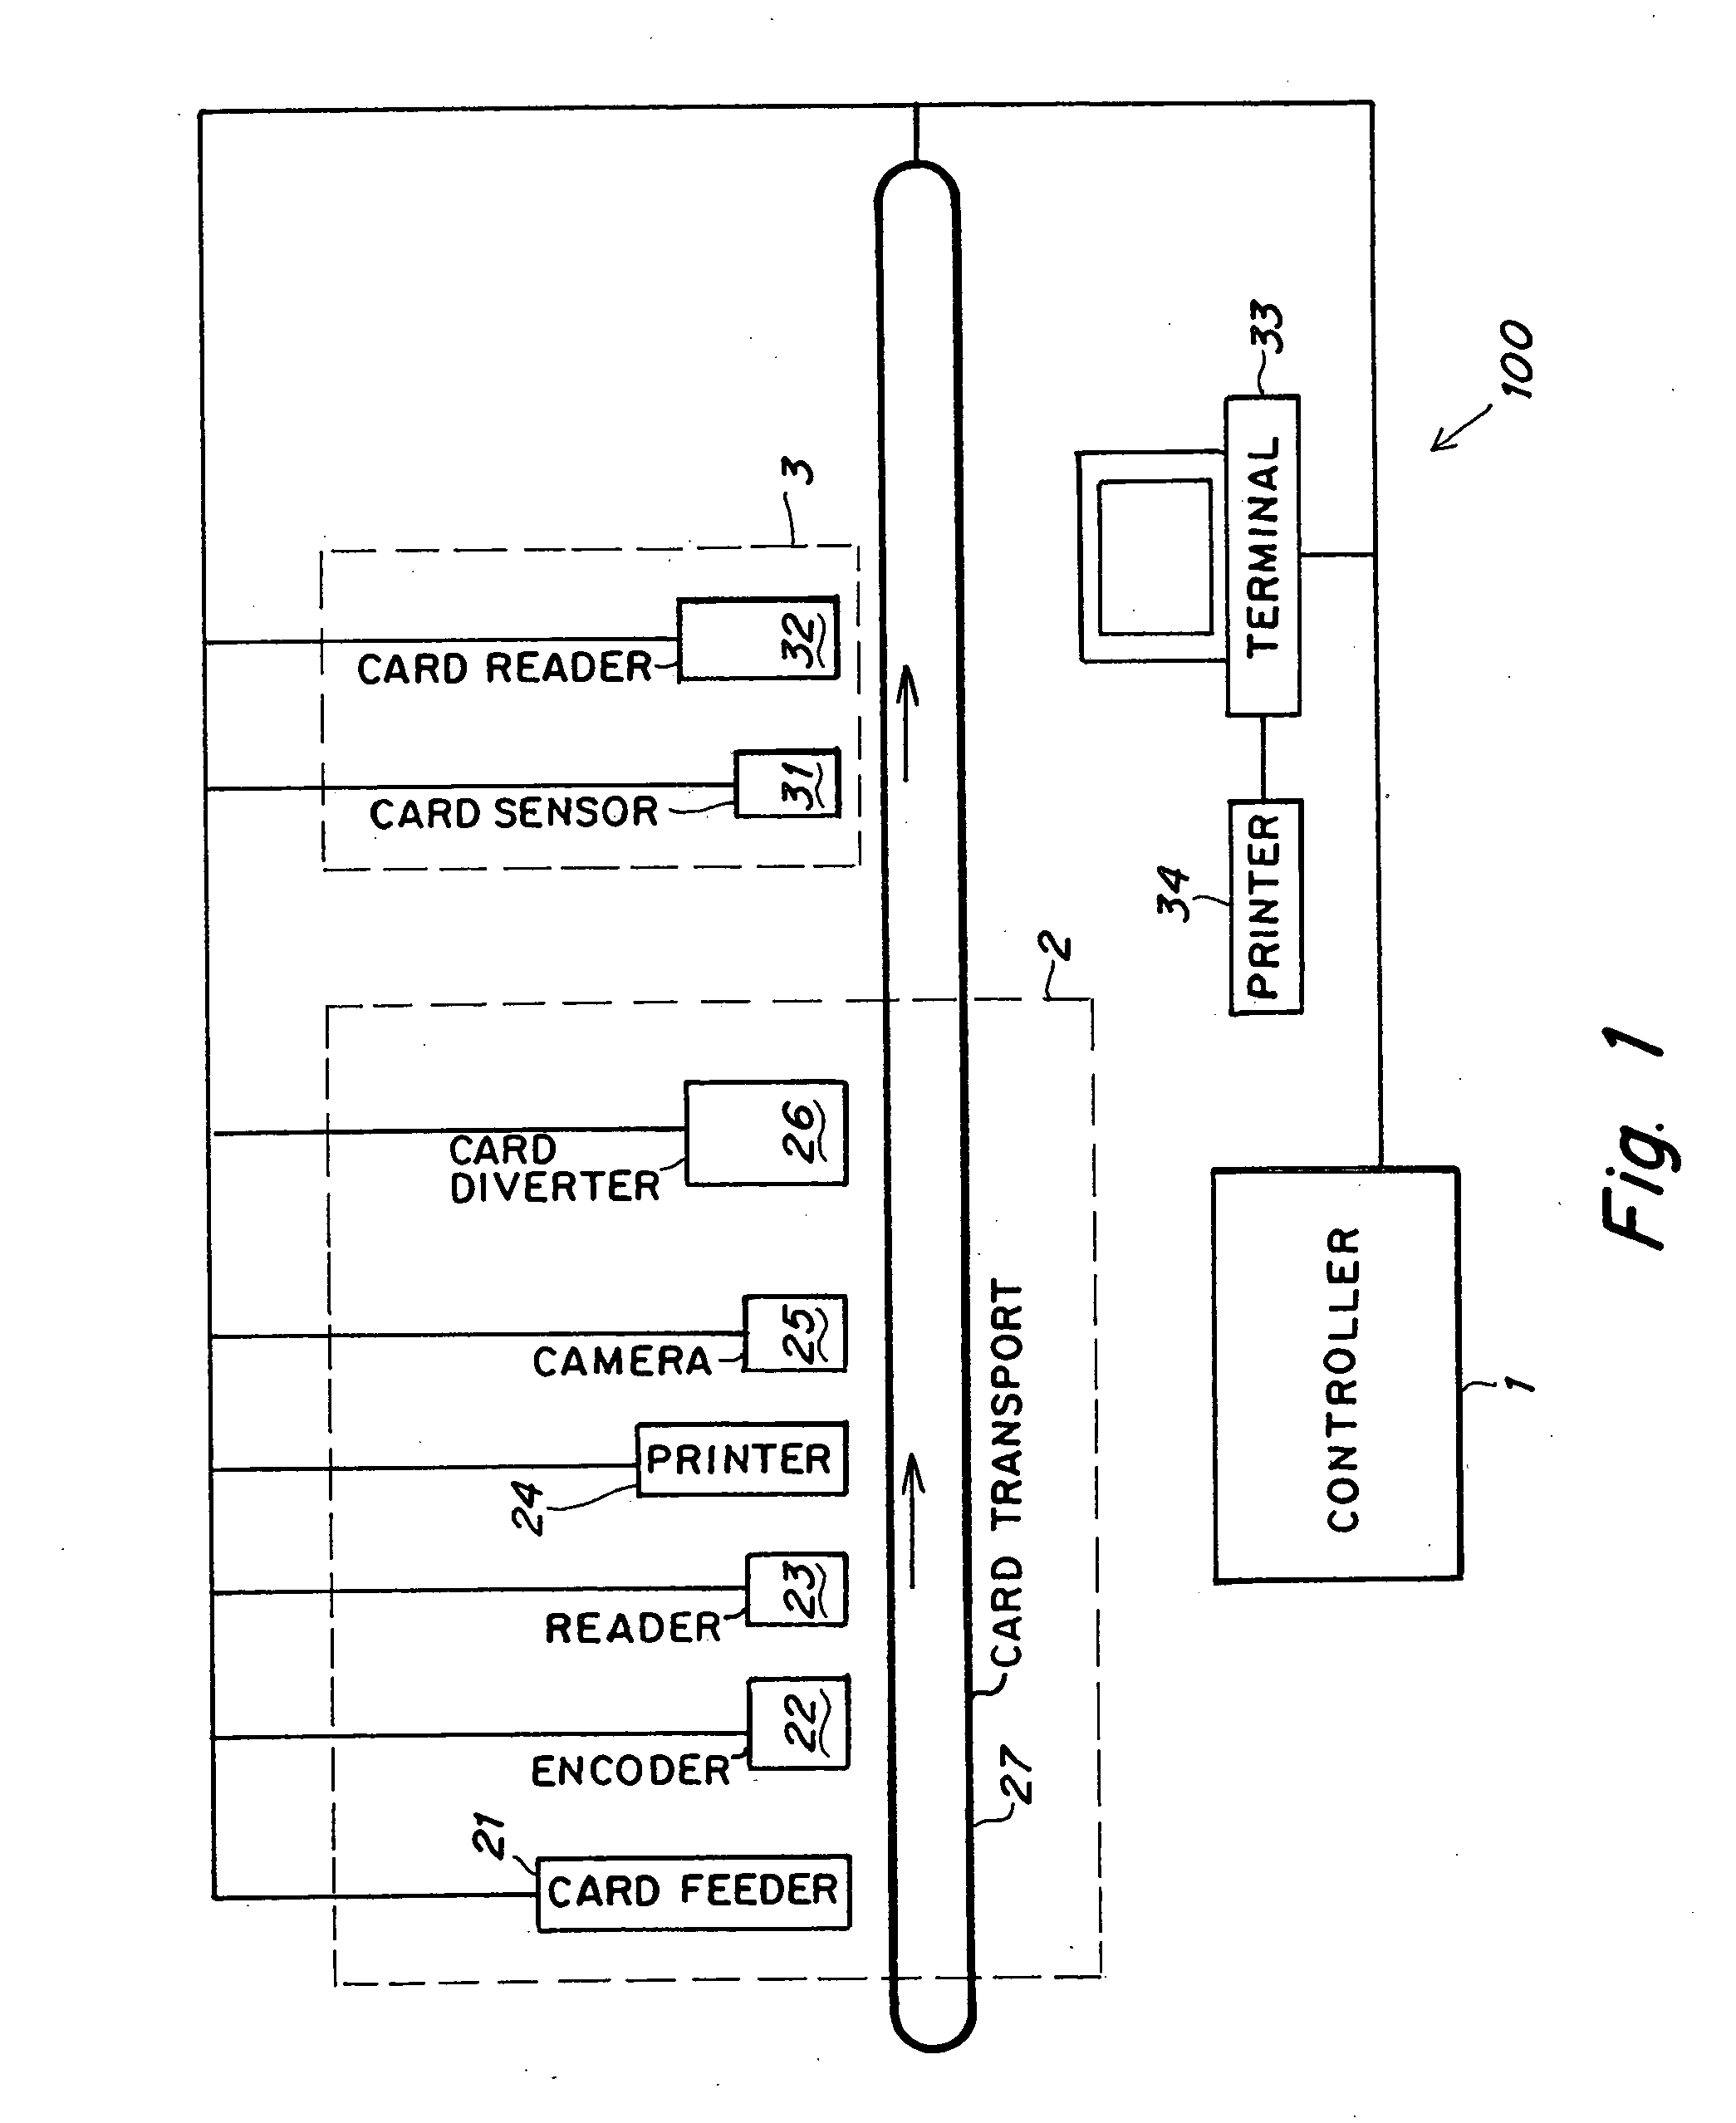 Transaction card fabrication control system and method